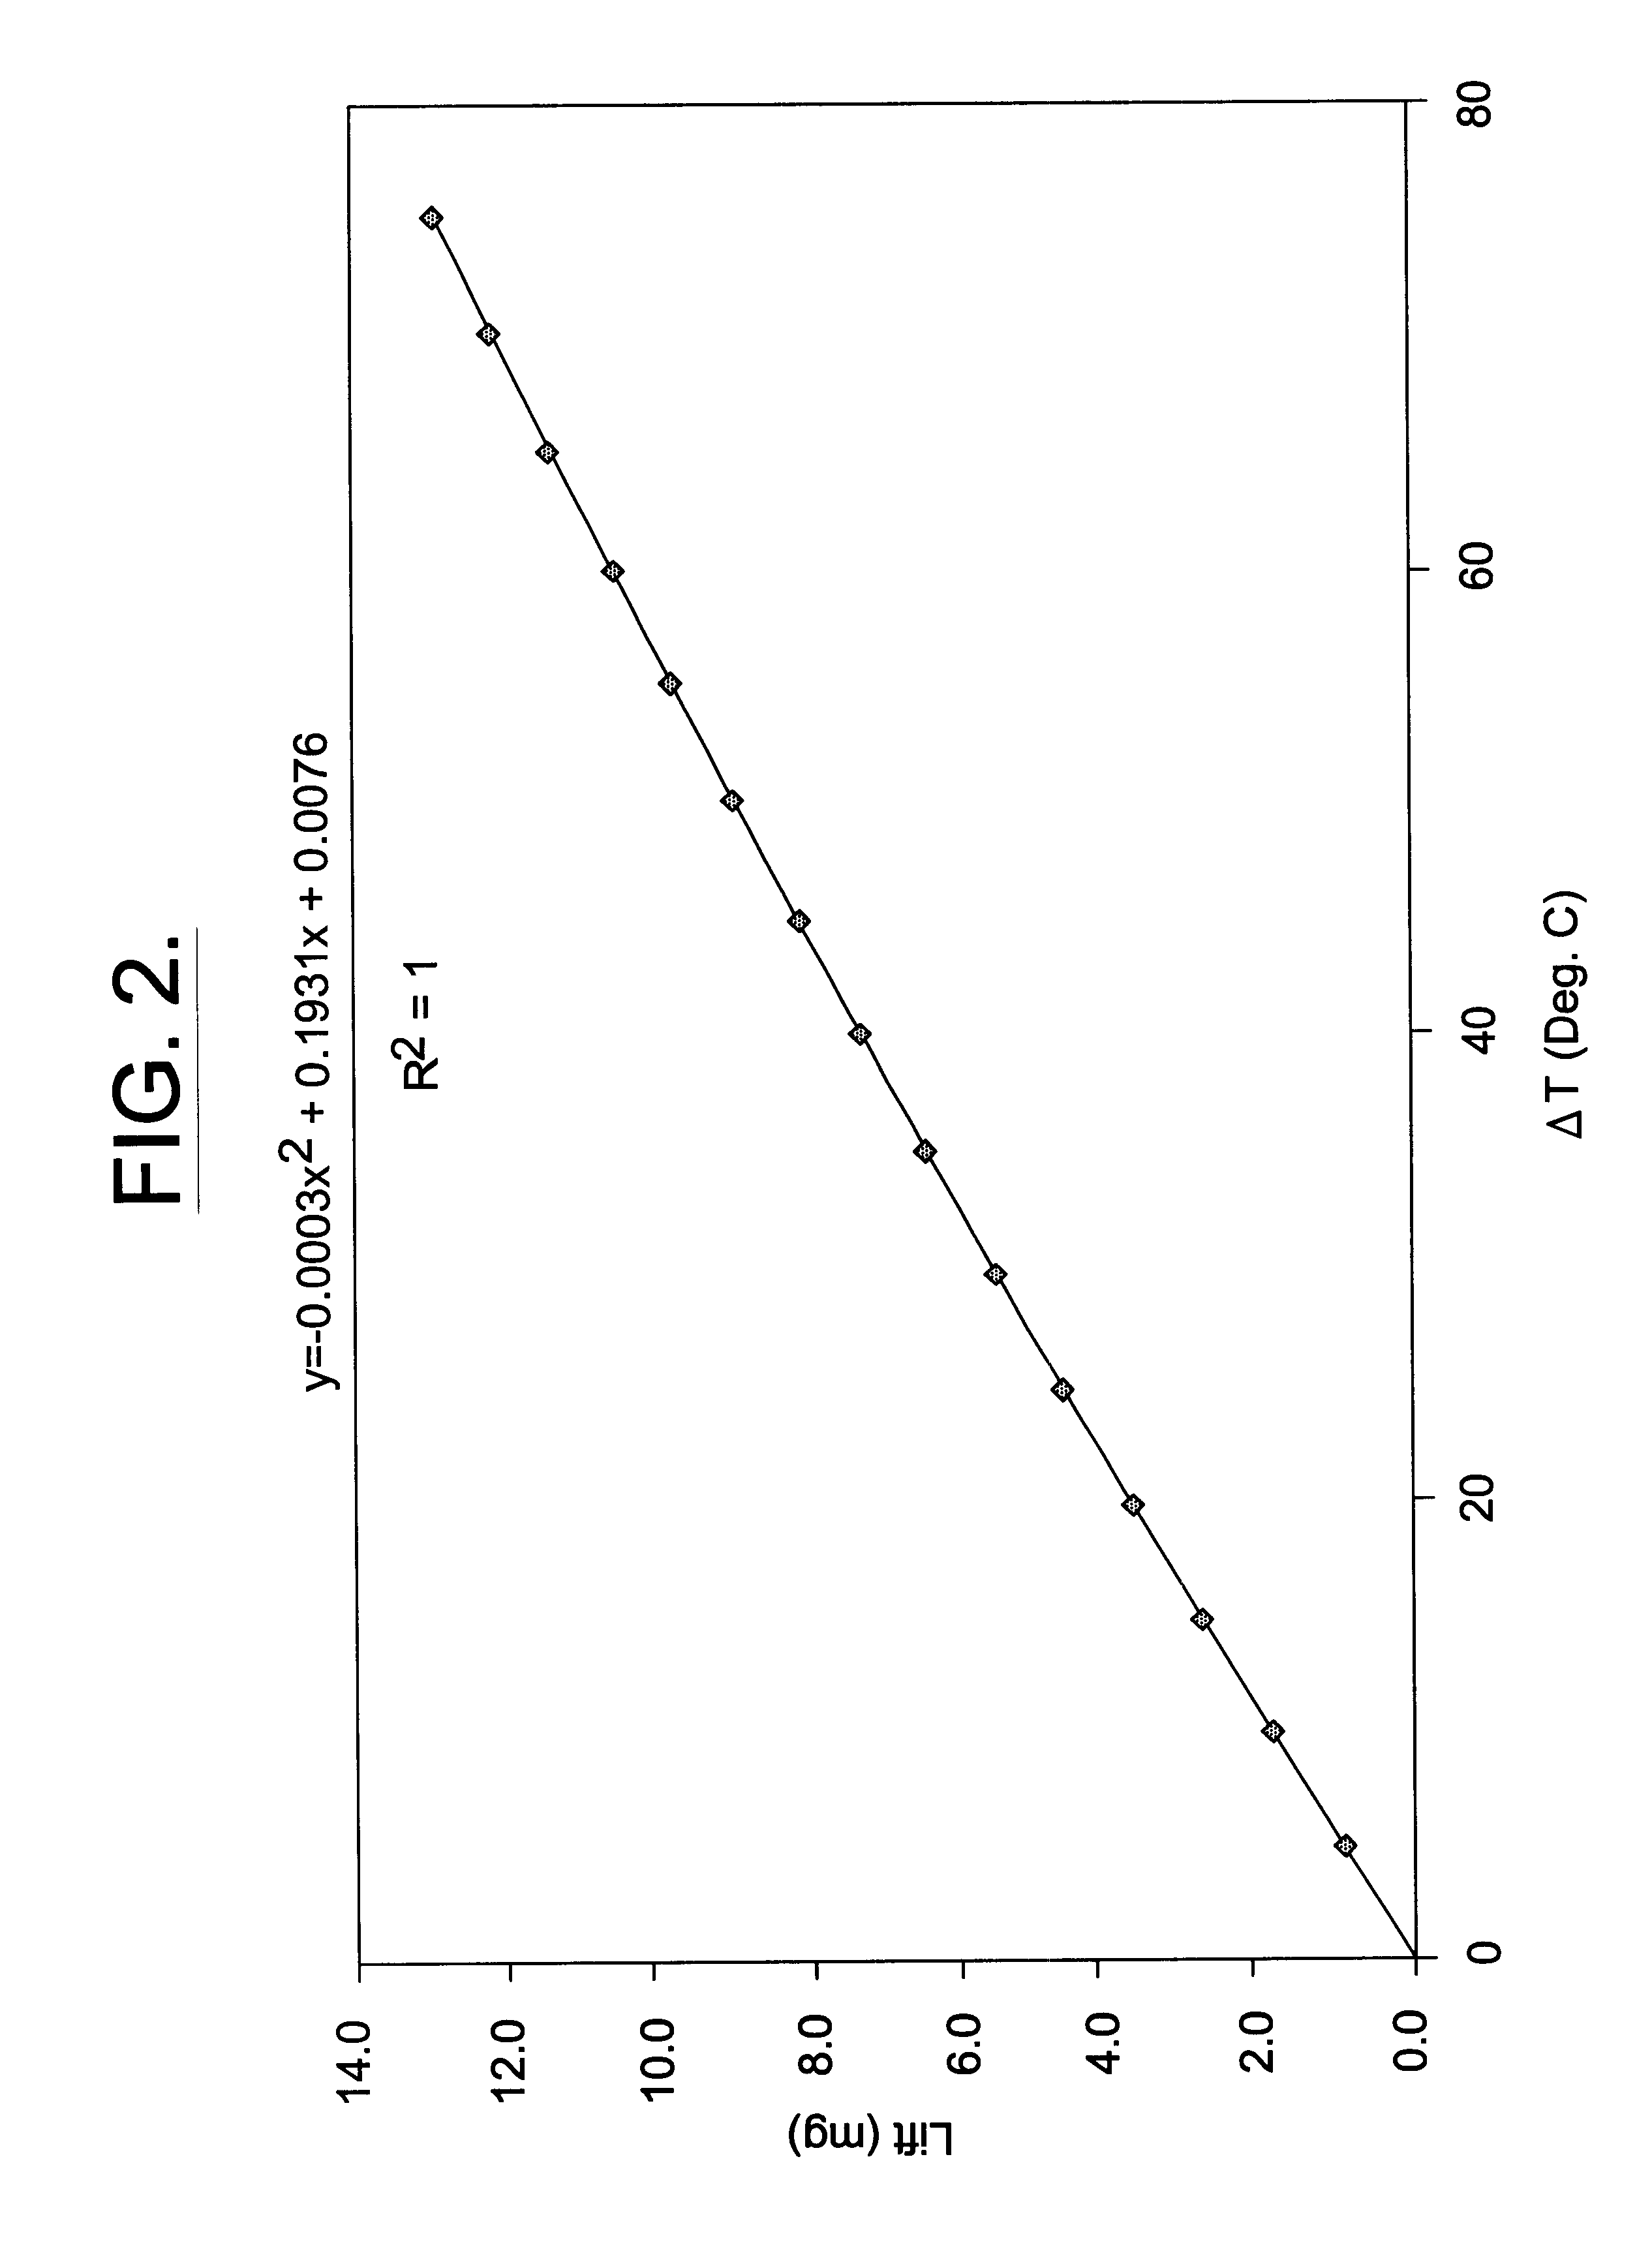 Method for correcting weight measurement errors during microwave heating